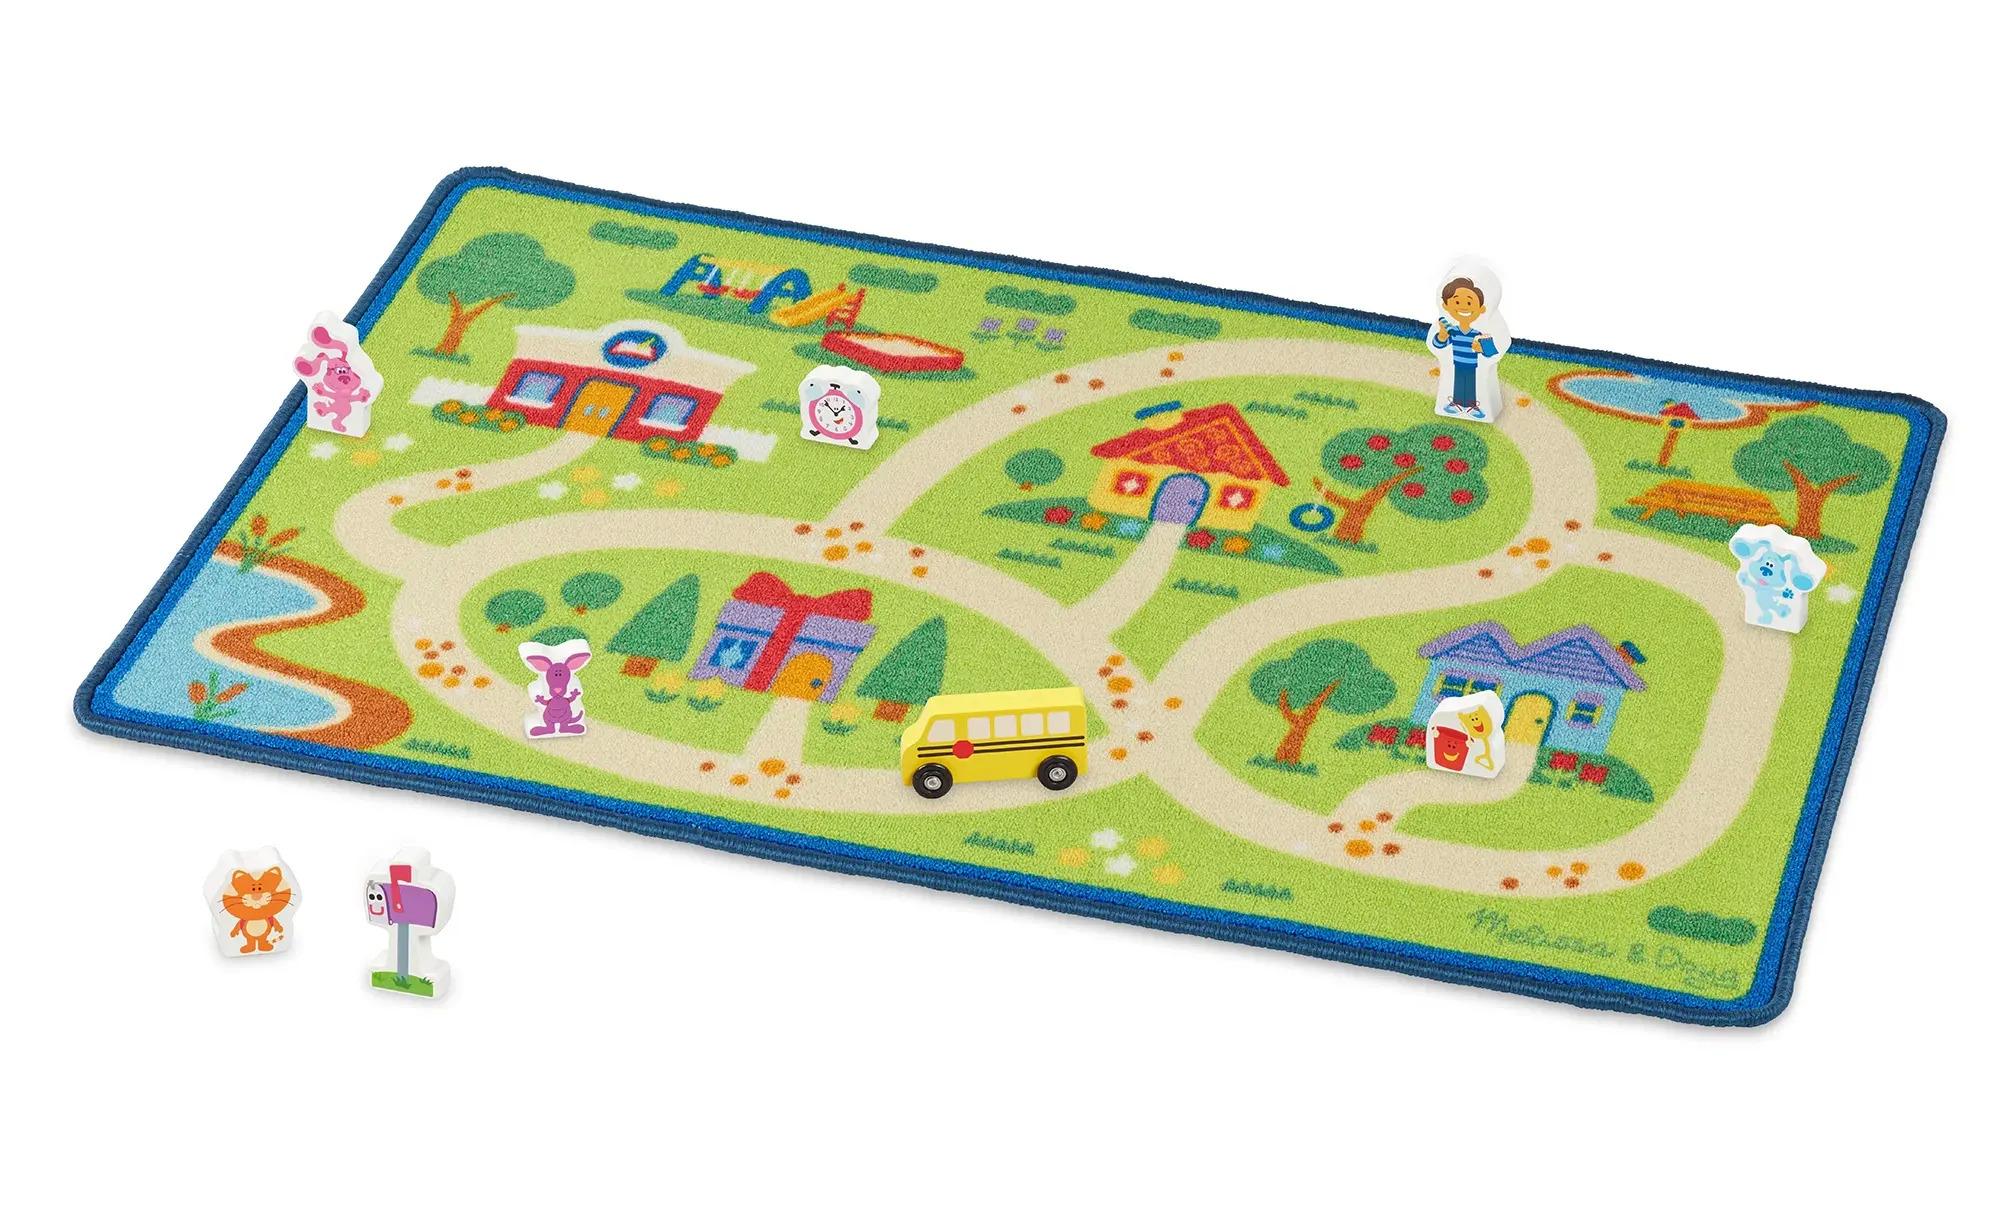 44x26 Melissa and Doug Blues Clues Activity Rug for $7.44